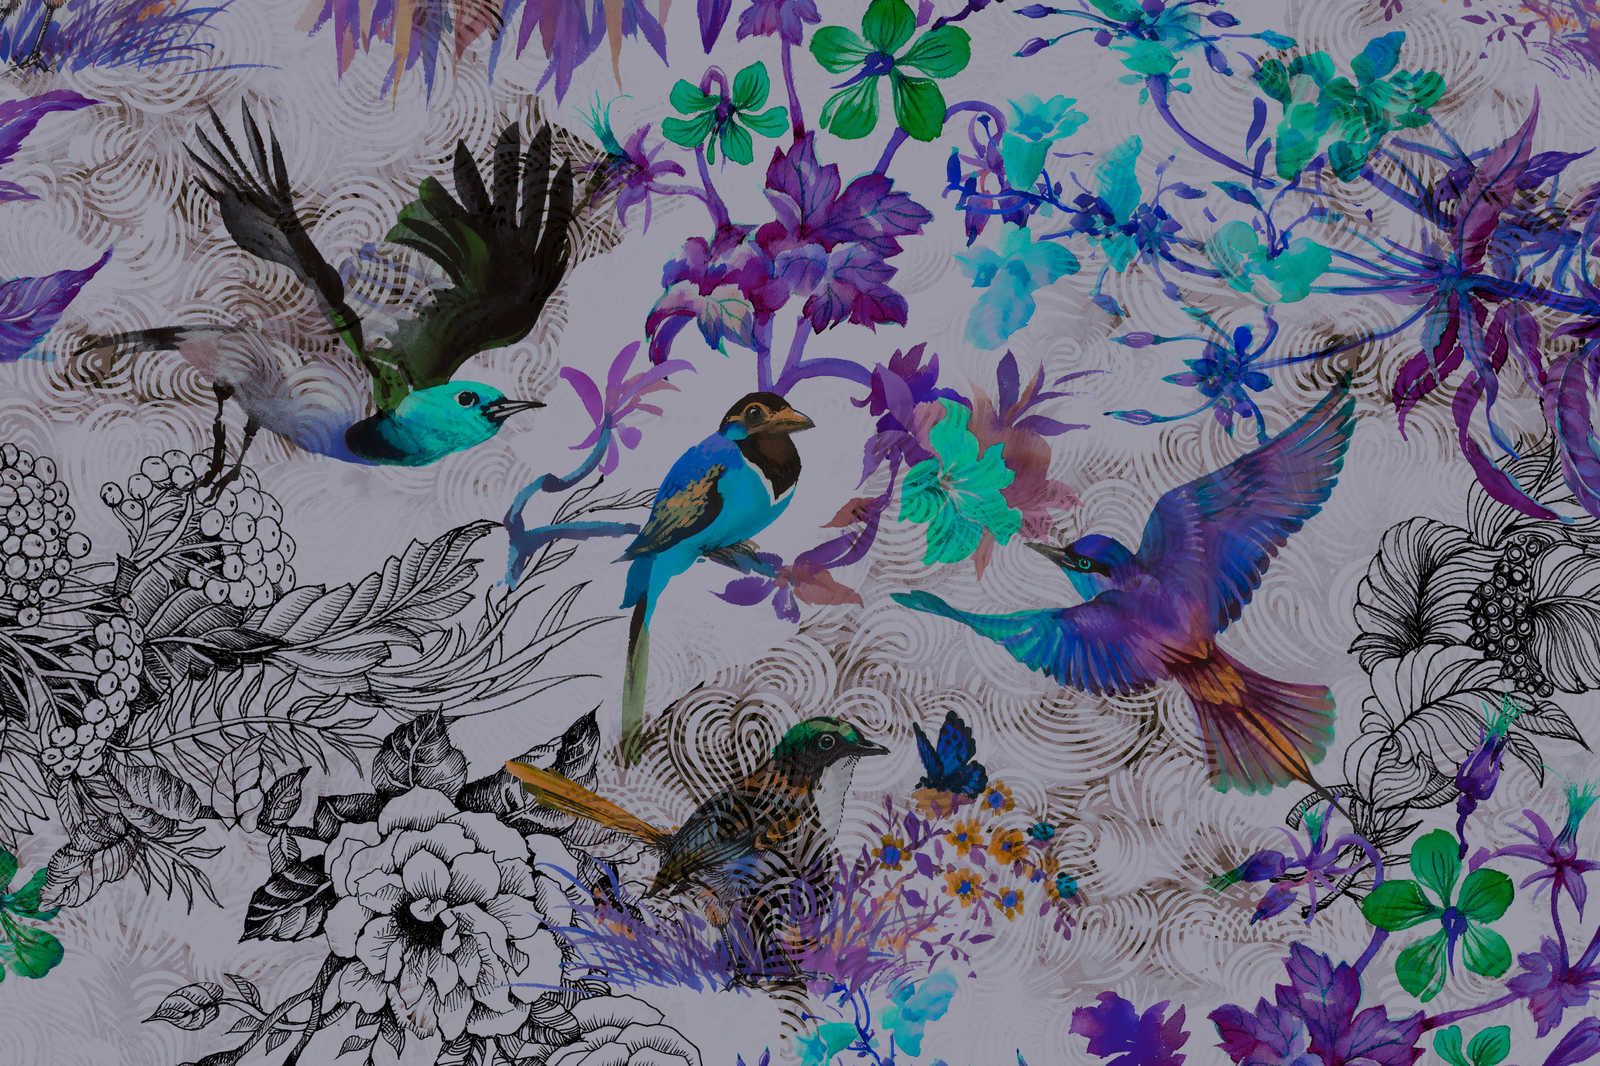             Purple Canvas Painting with Flowers & Birds - 1.20 m x 0.80 m
        